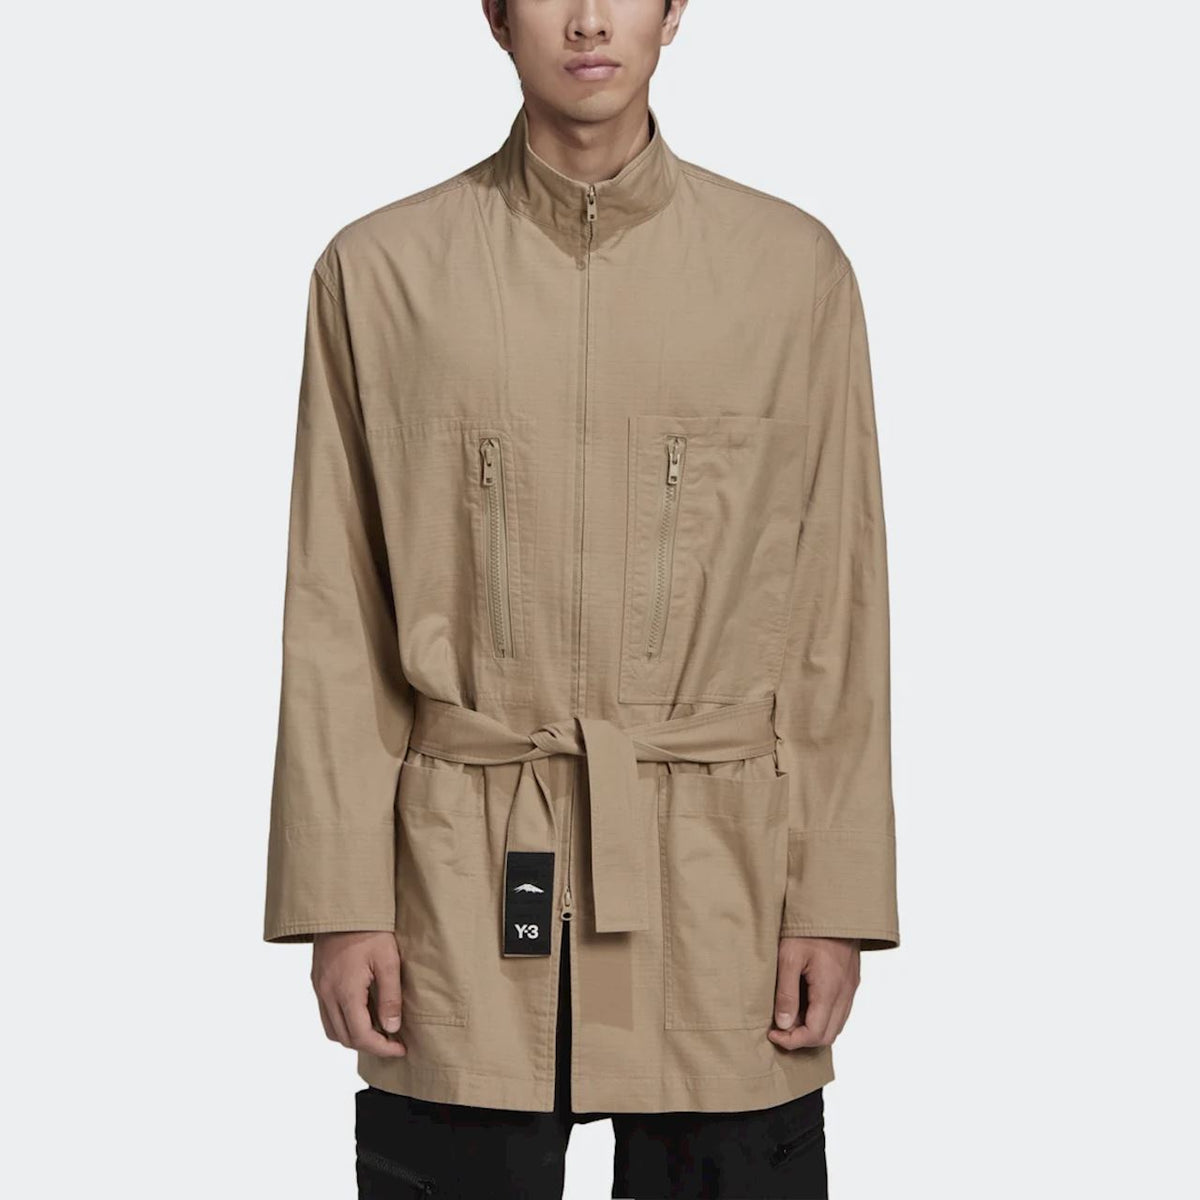 tradesports.co.uk Adidas Y-3 Men's Chapter 3 Utility Jacket - Brown